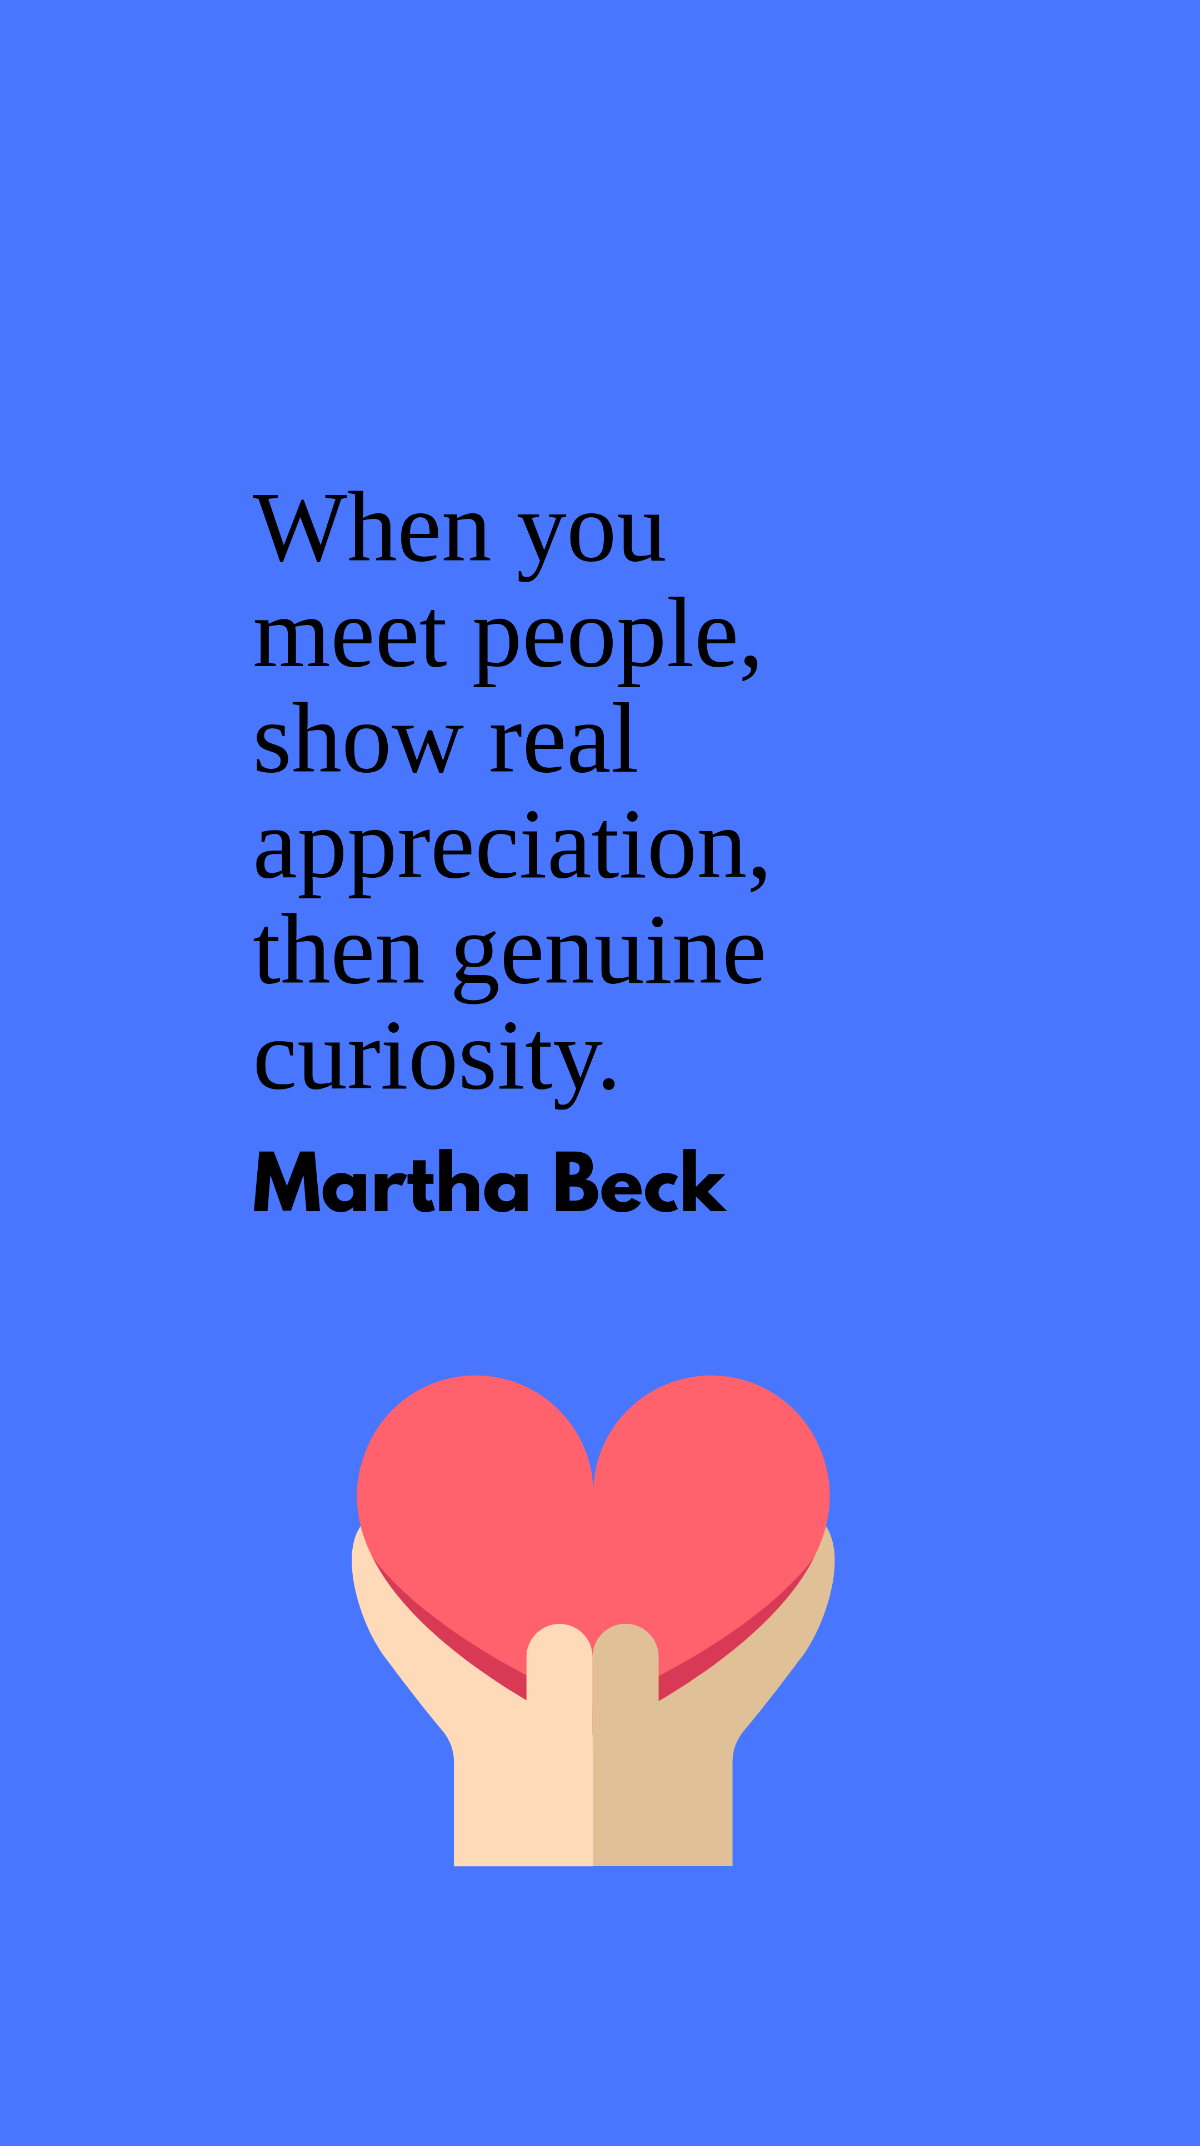 Martha Beck - When you meet people, show real appreciation, then genuine curiosity. Template